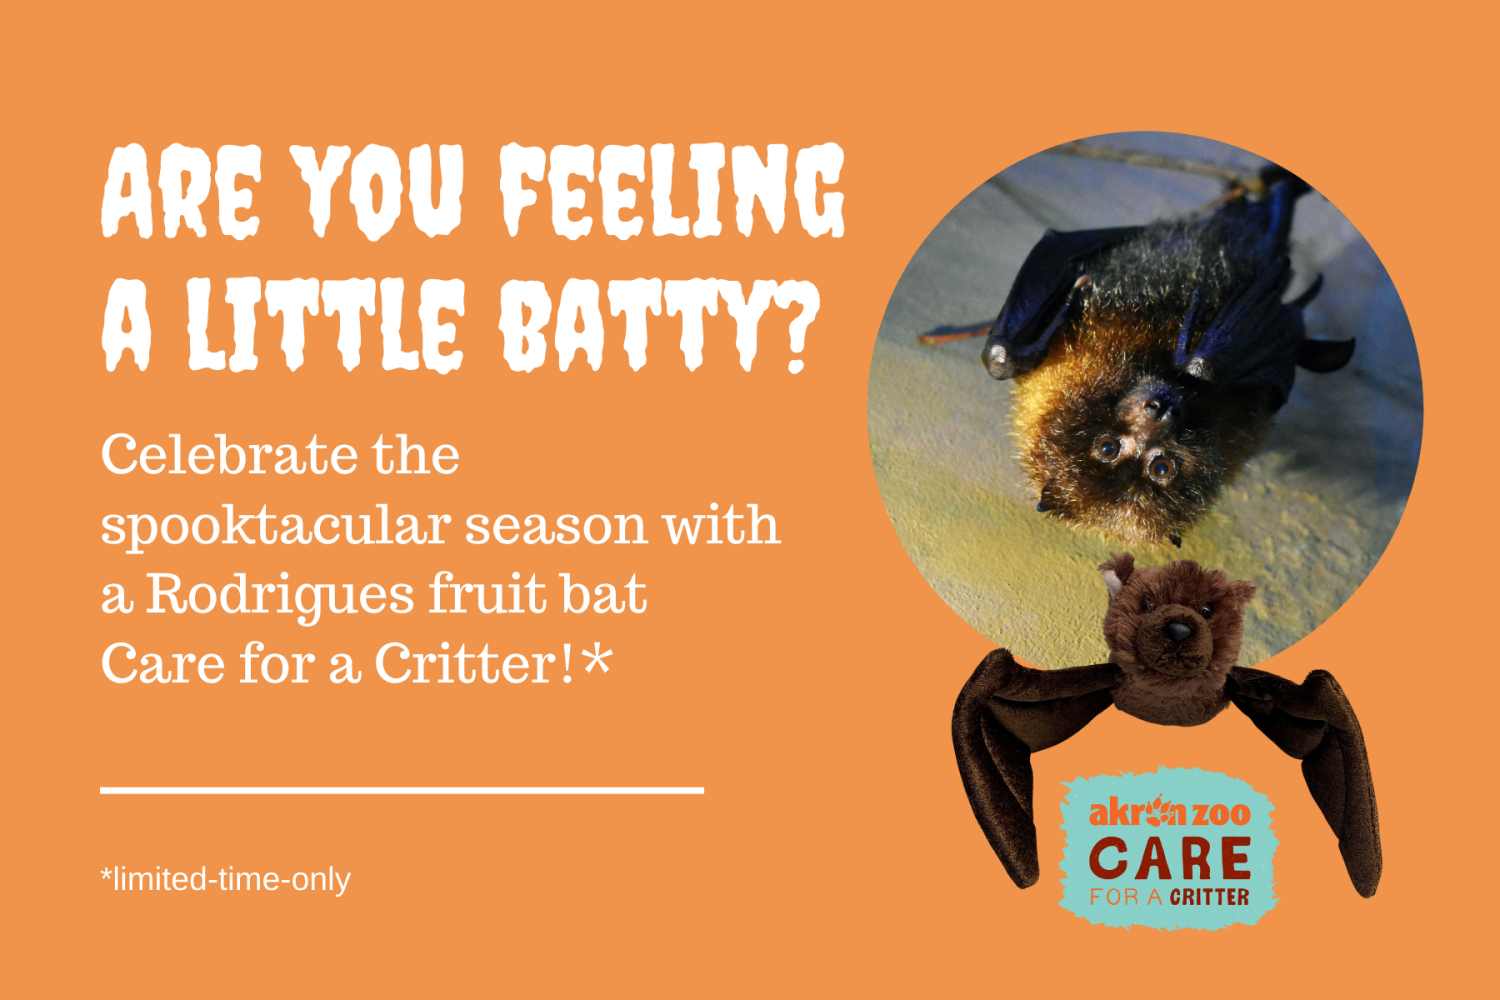 Bat Care for a Critter Promotion